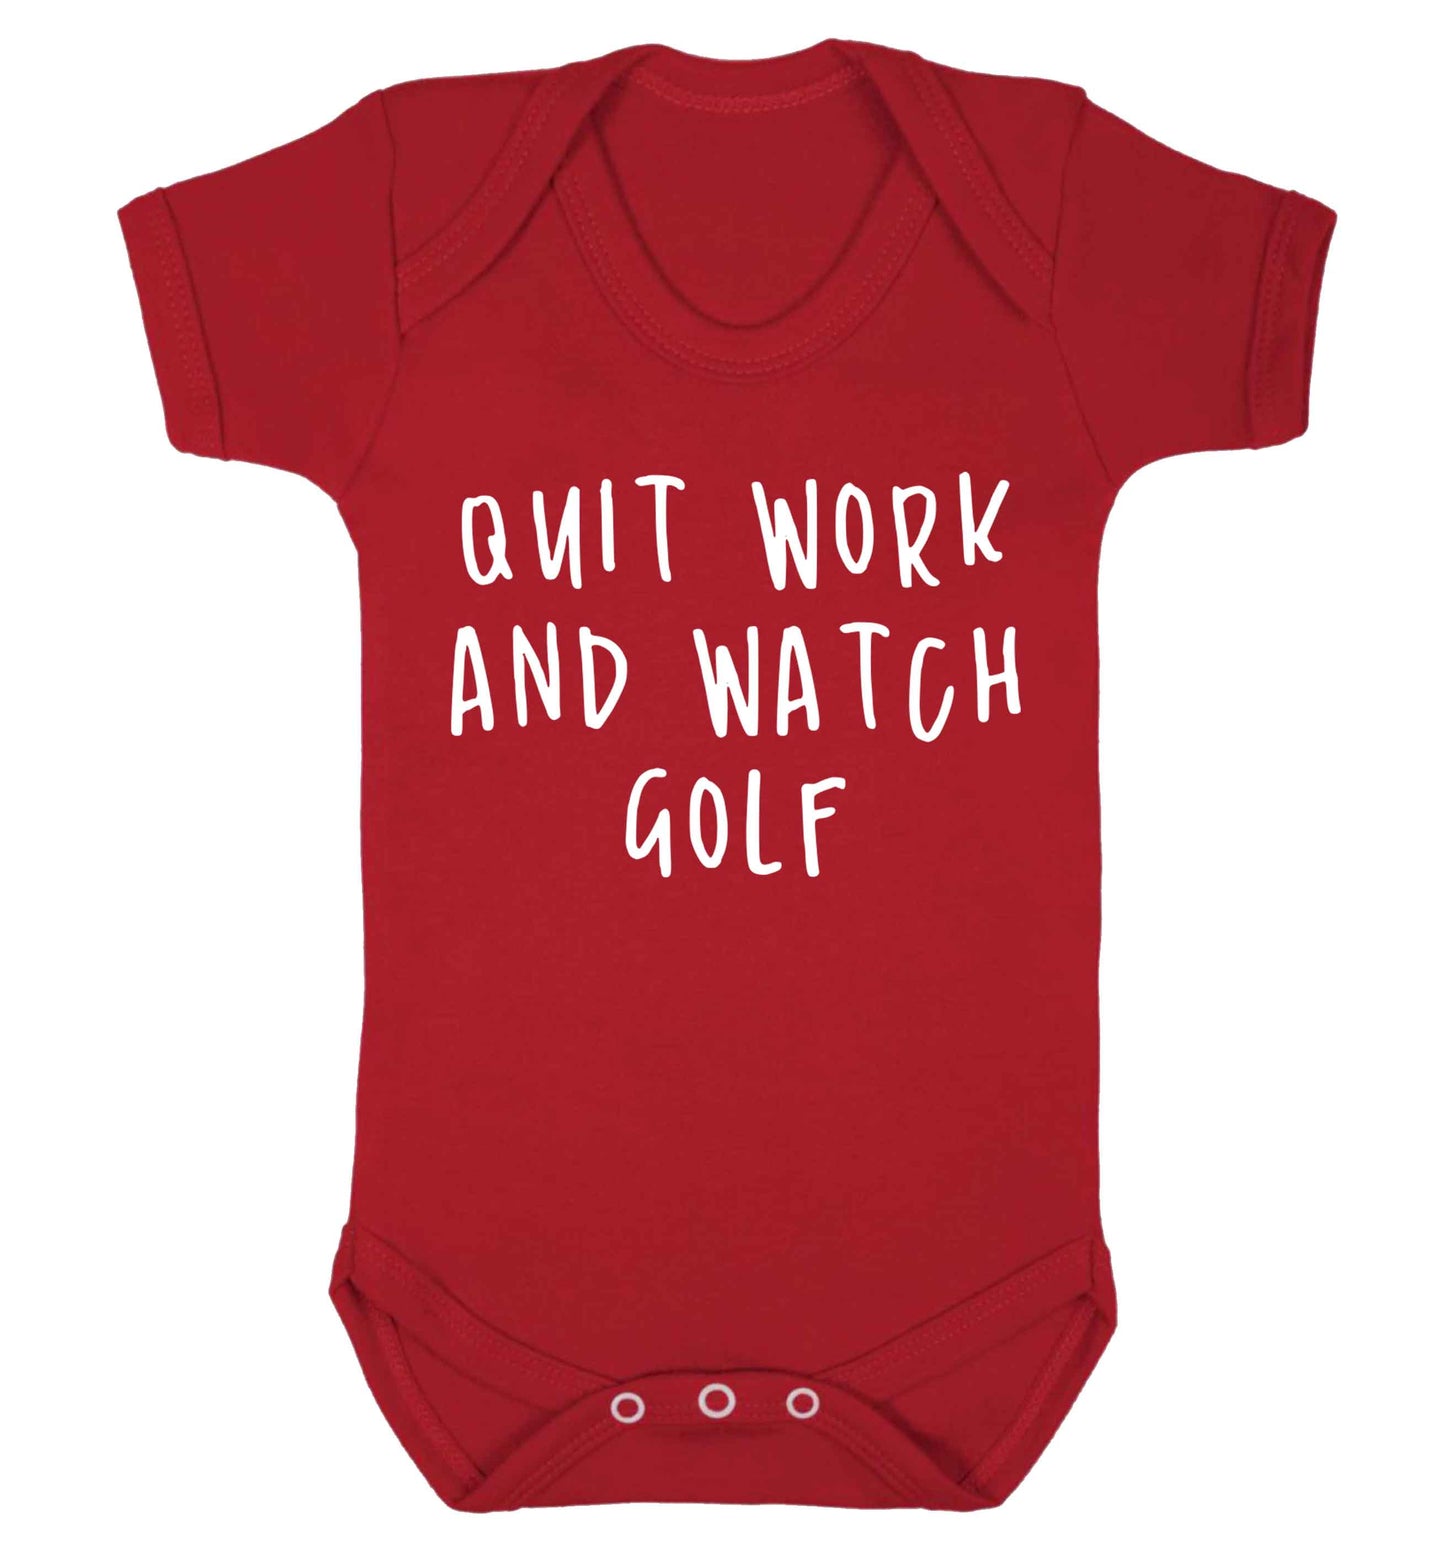 Quit work and watch golf Baby Vest red 18-24 months